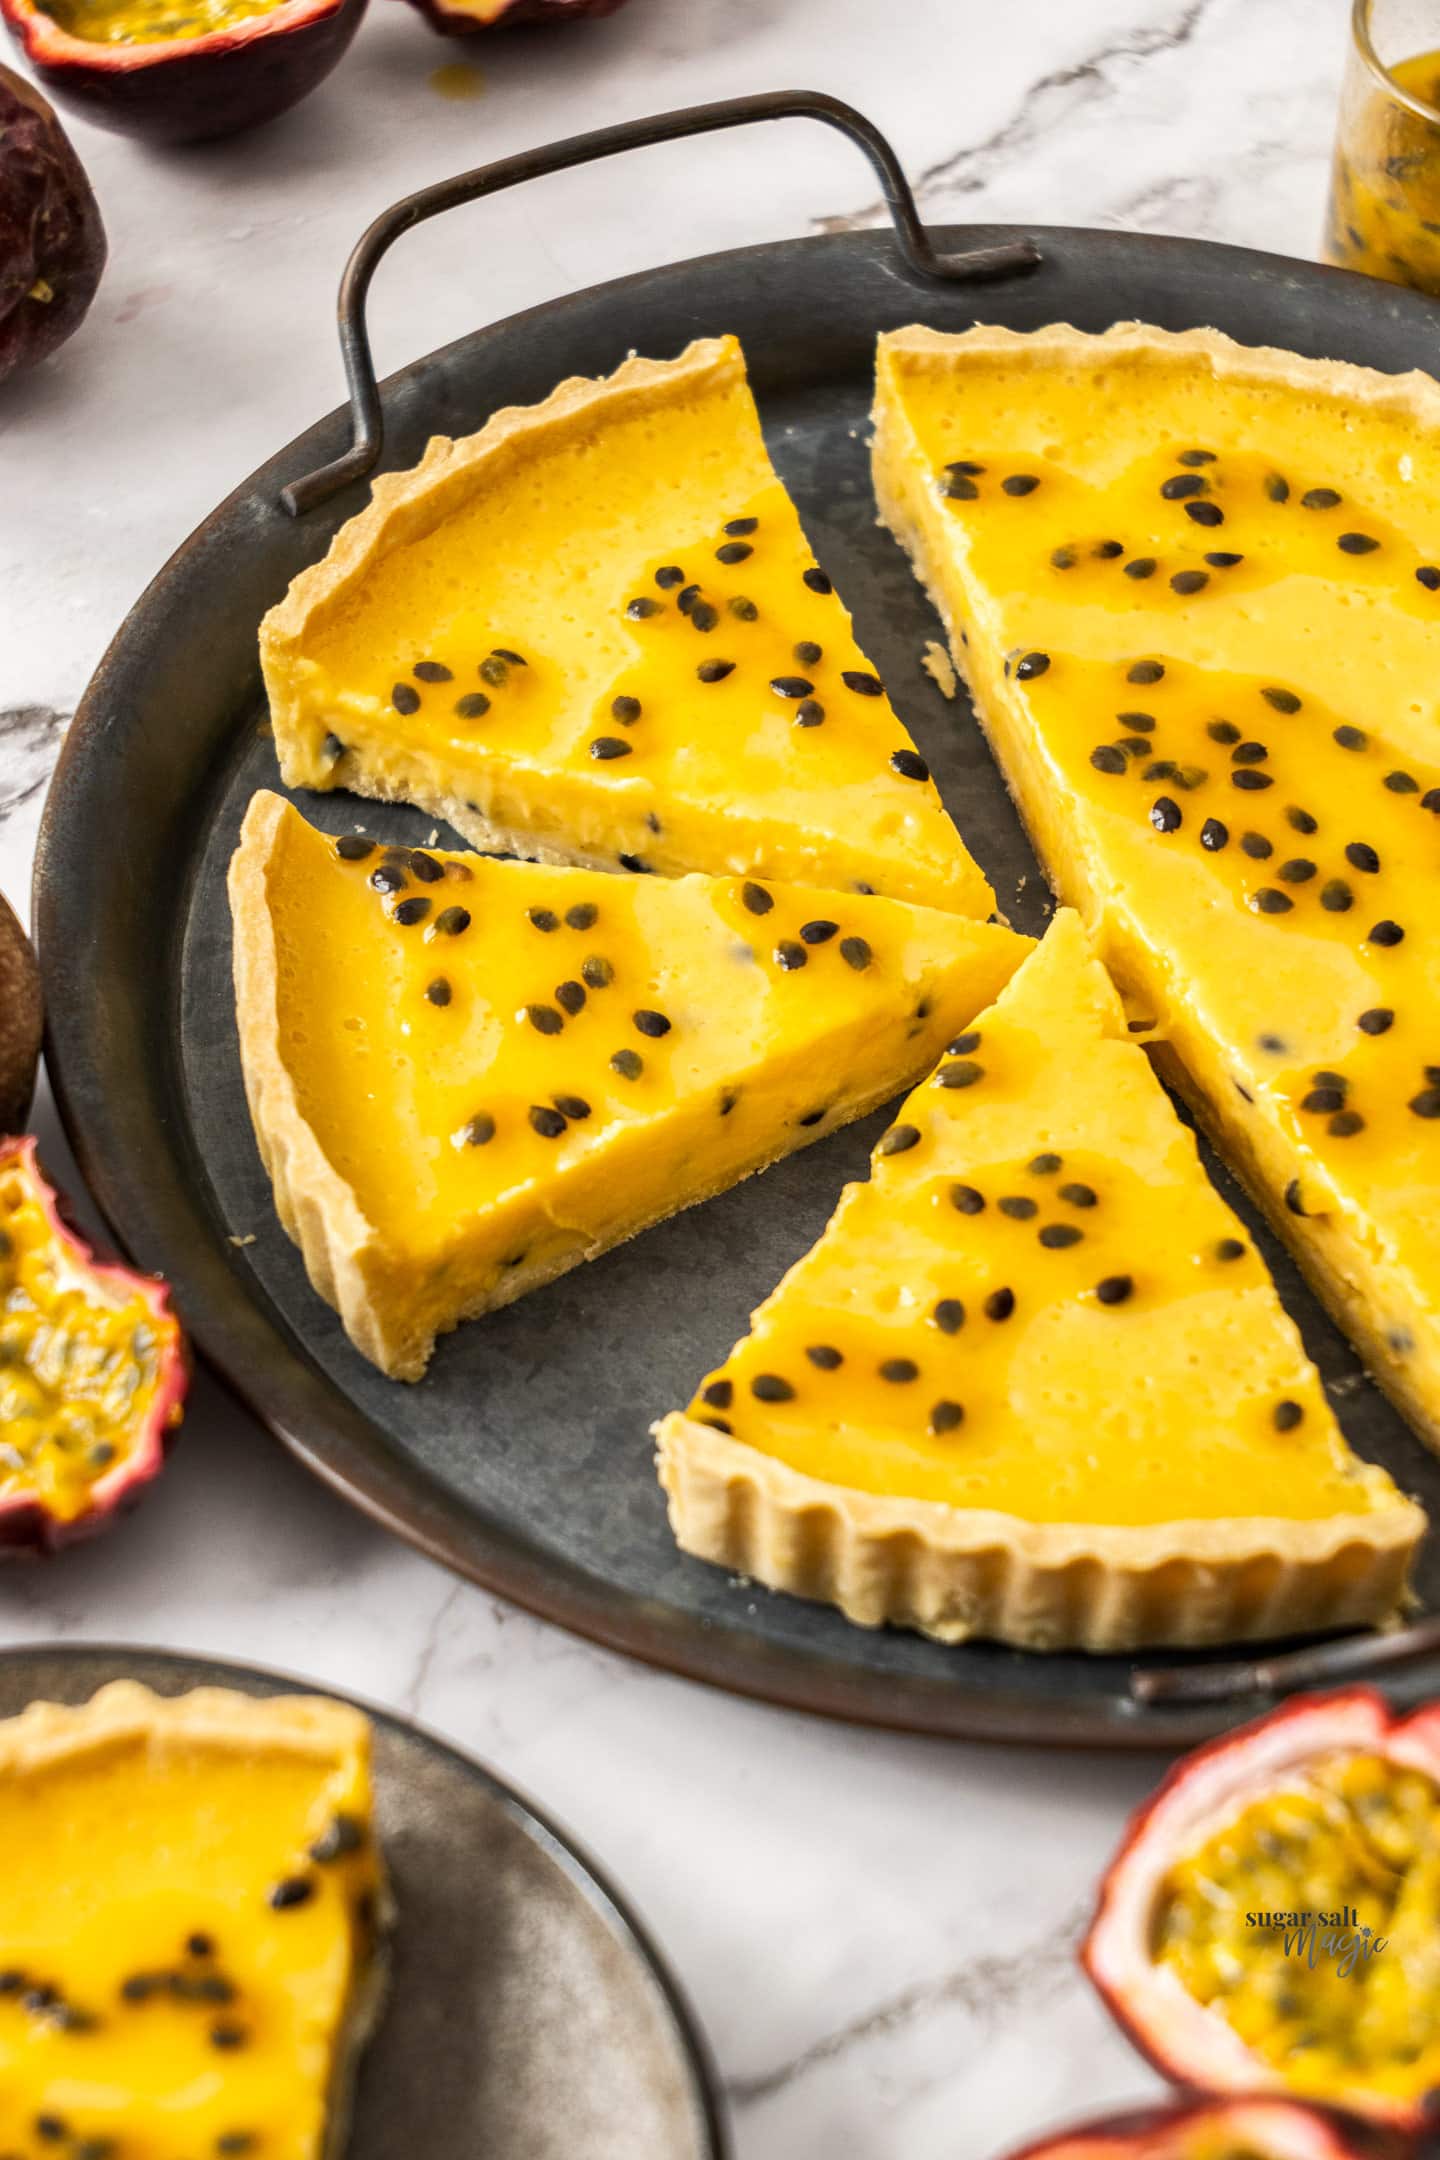 A passionfruit curd tart cut into slices.